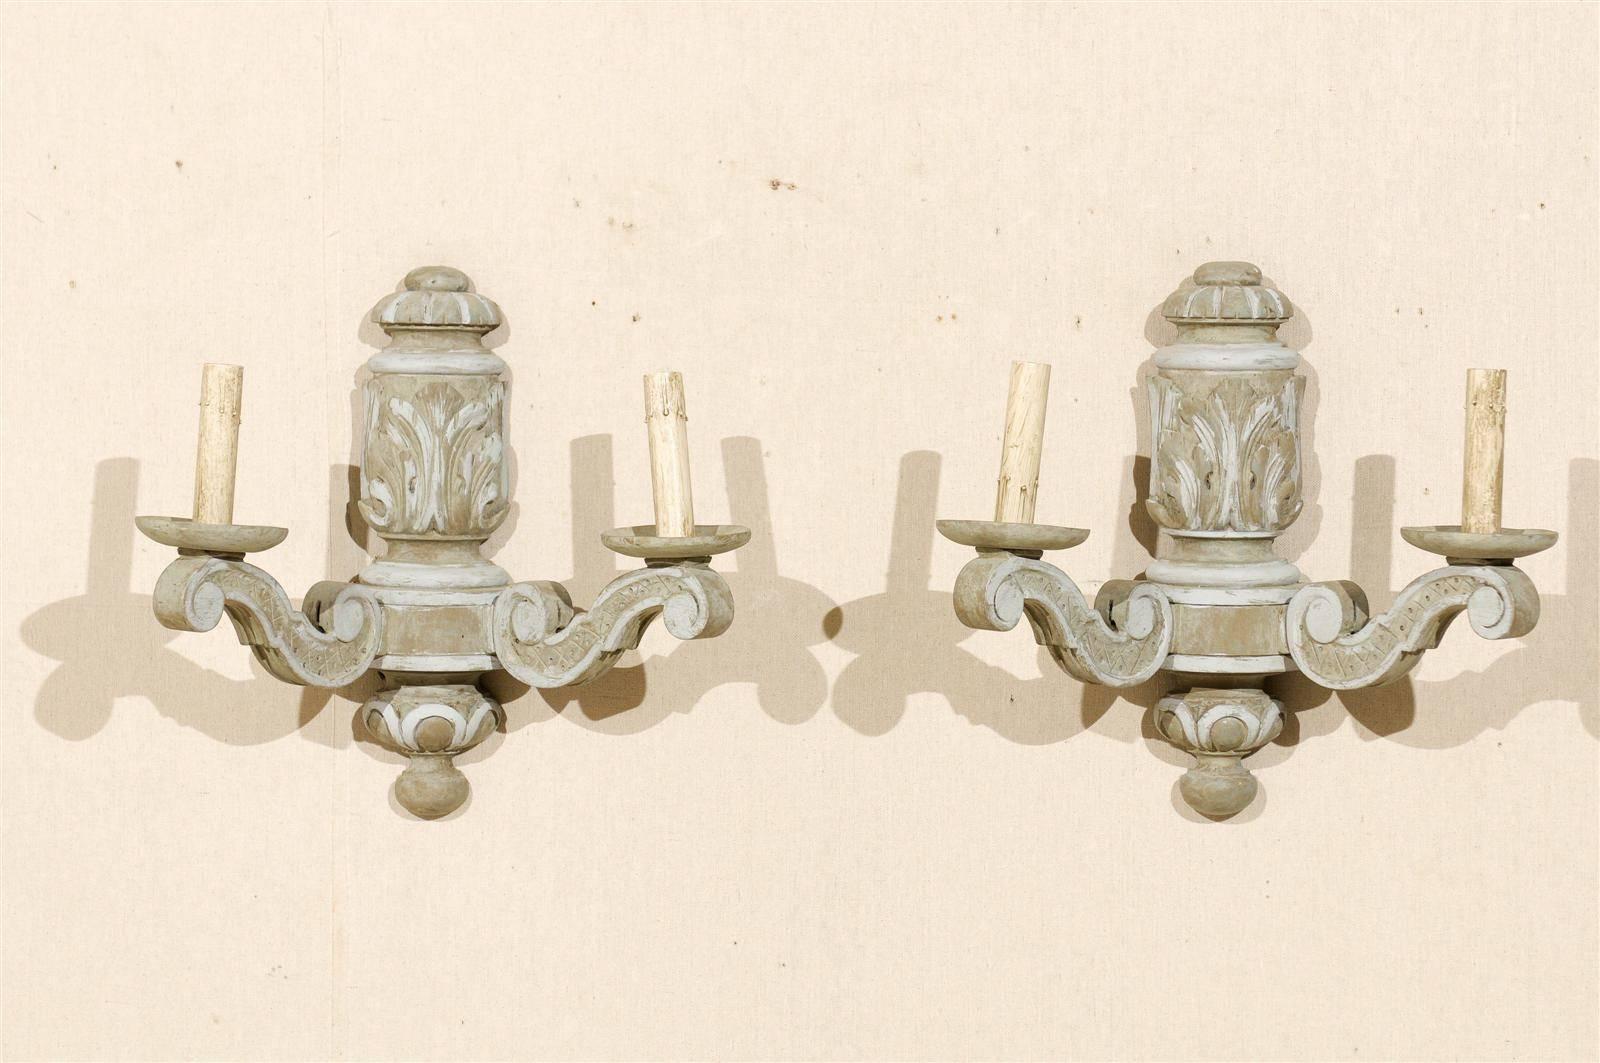 A pair of French carved and painted wood sconces. These scones are two-toned in color. The have carved acanthus leaf motifs on the central column. Two s-scroll arms on each sconce lead outward. Each sconce has a round finial at the bottom. These